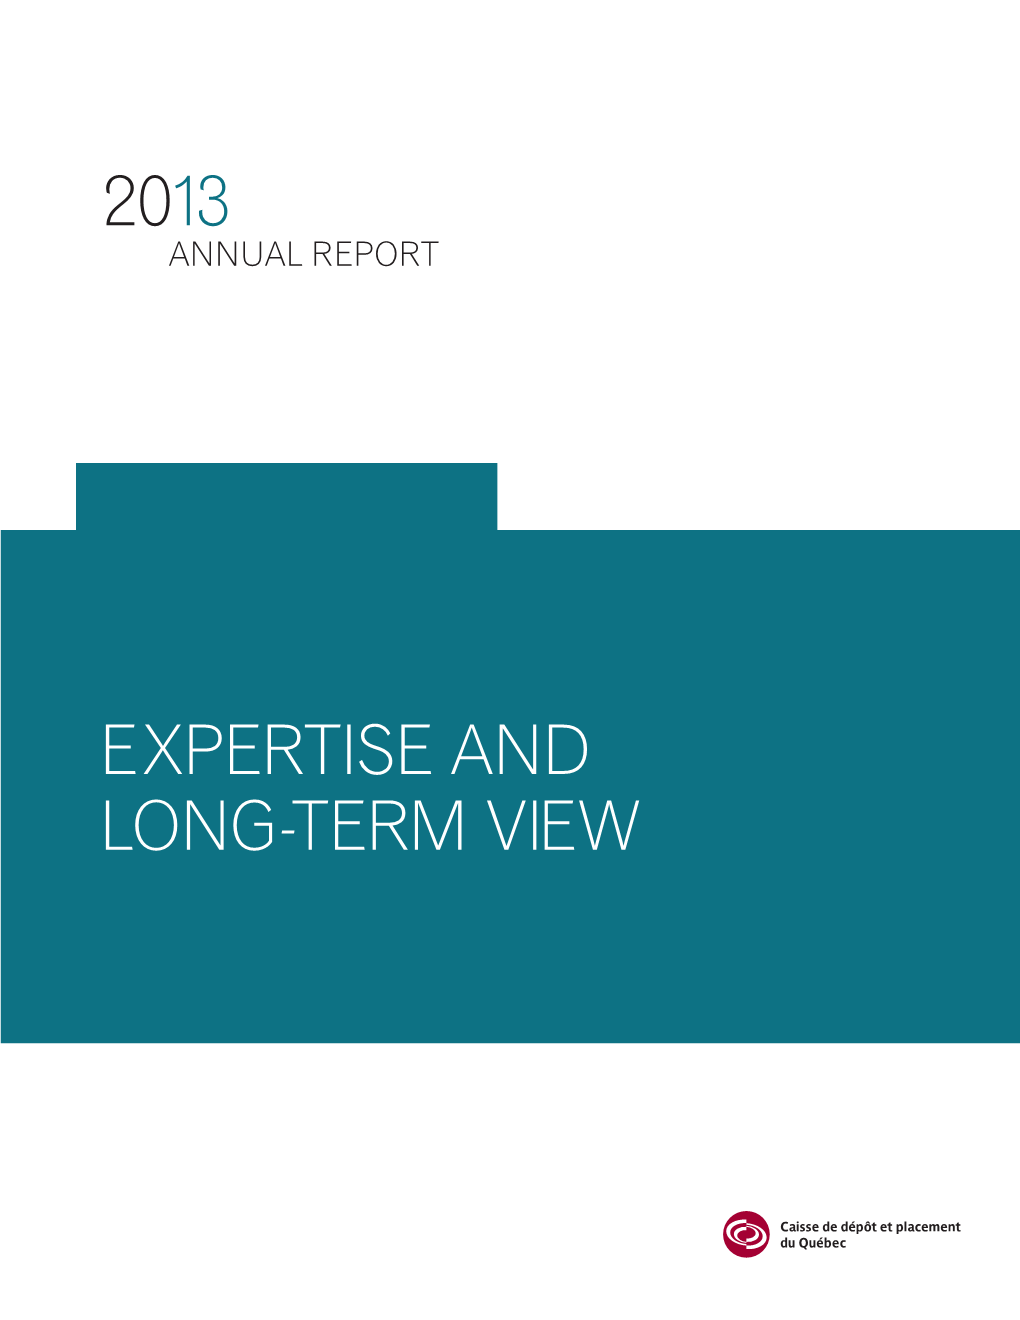 2013 Expertise and Long-Term View